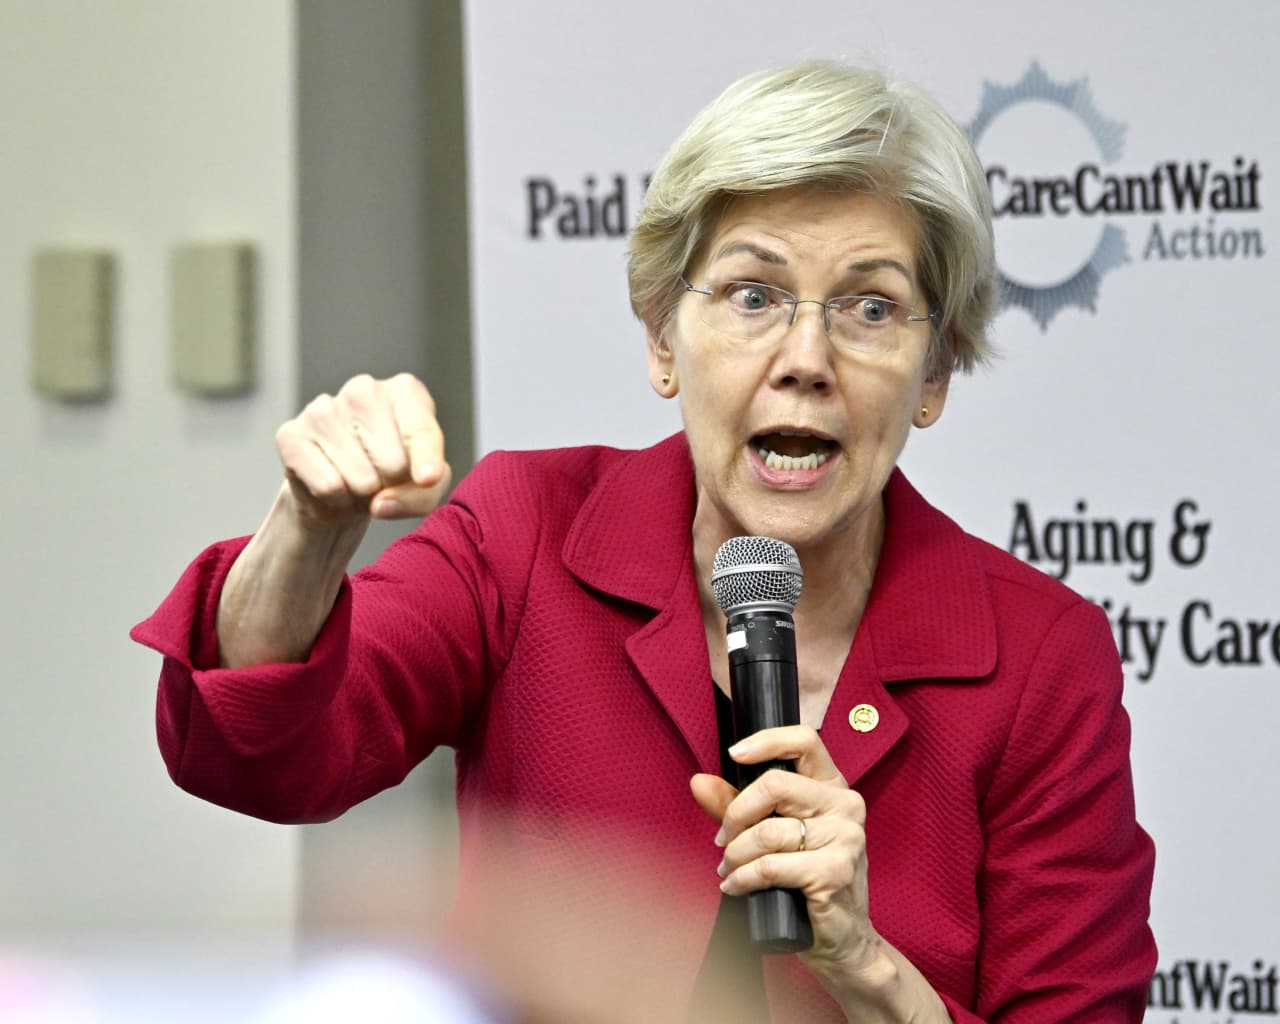 Warren urges Biden to target grocery chains over high prices. But there’s debate over how much chains are to blame.